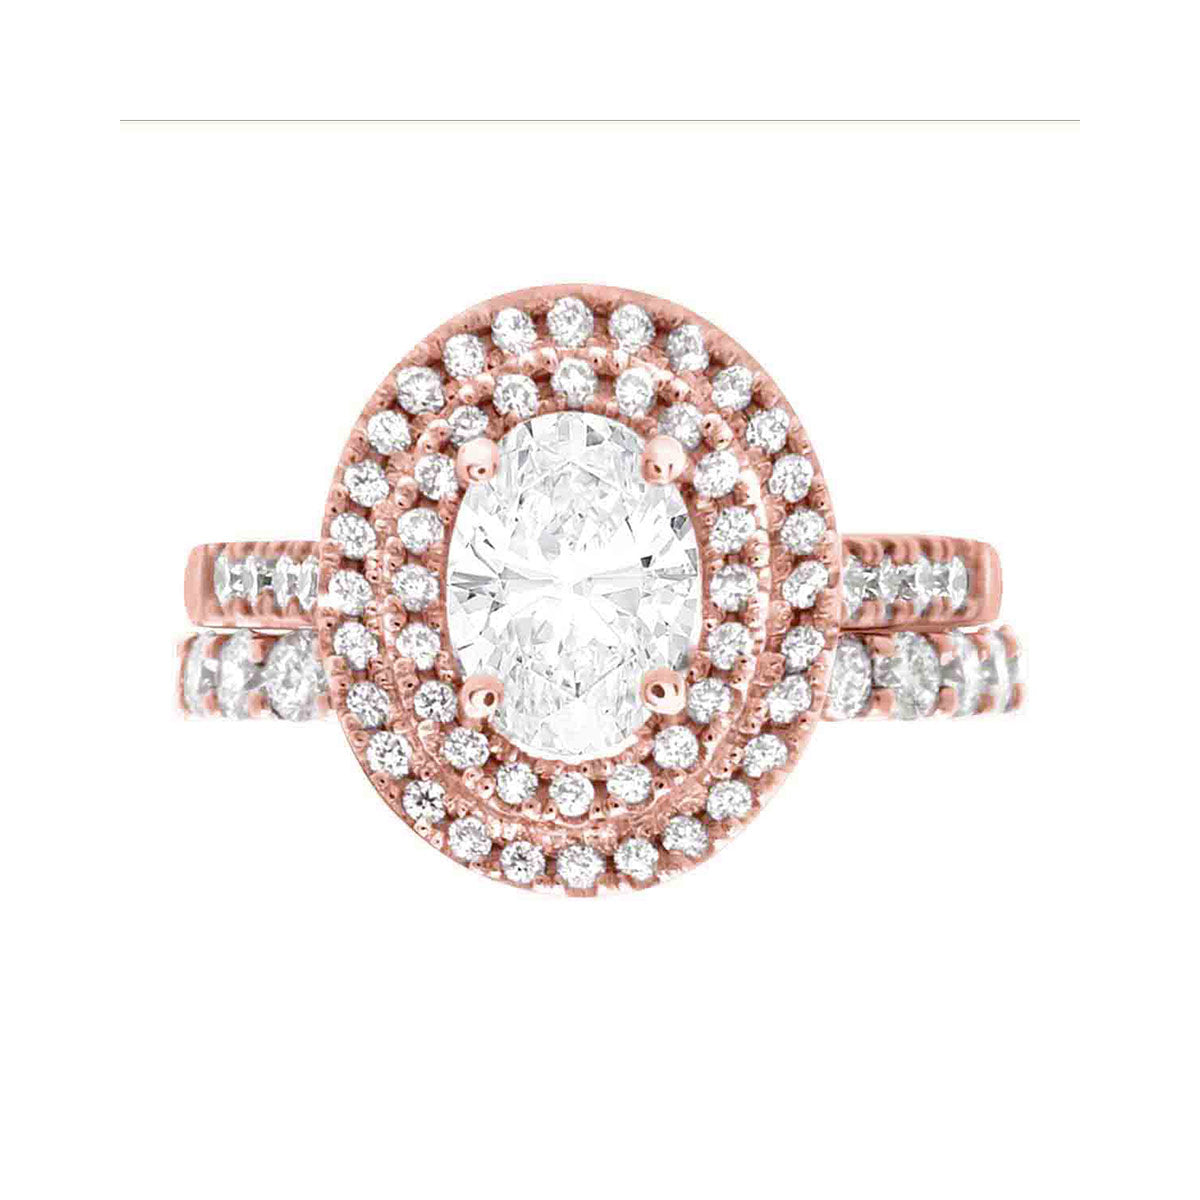 Double Halo Oval Engagement Ring In rose gold with a matching diamond set wedding ring